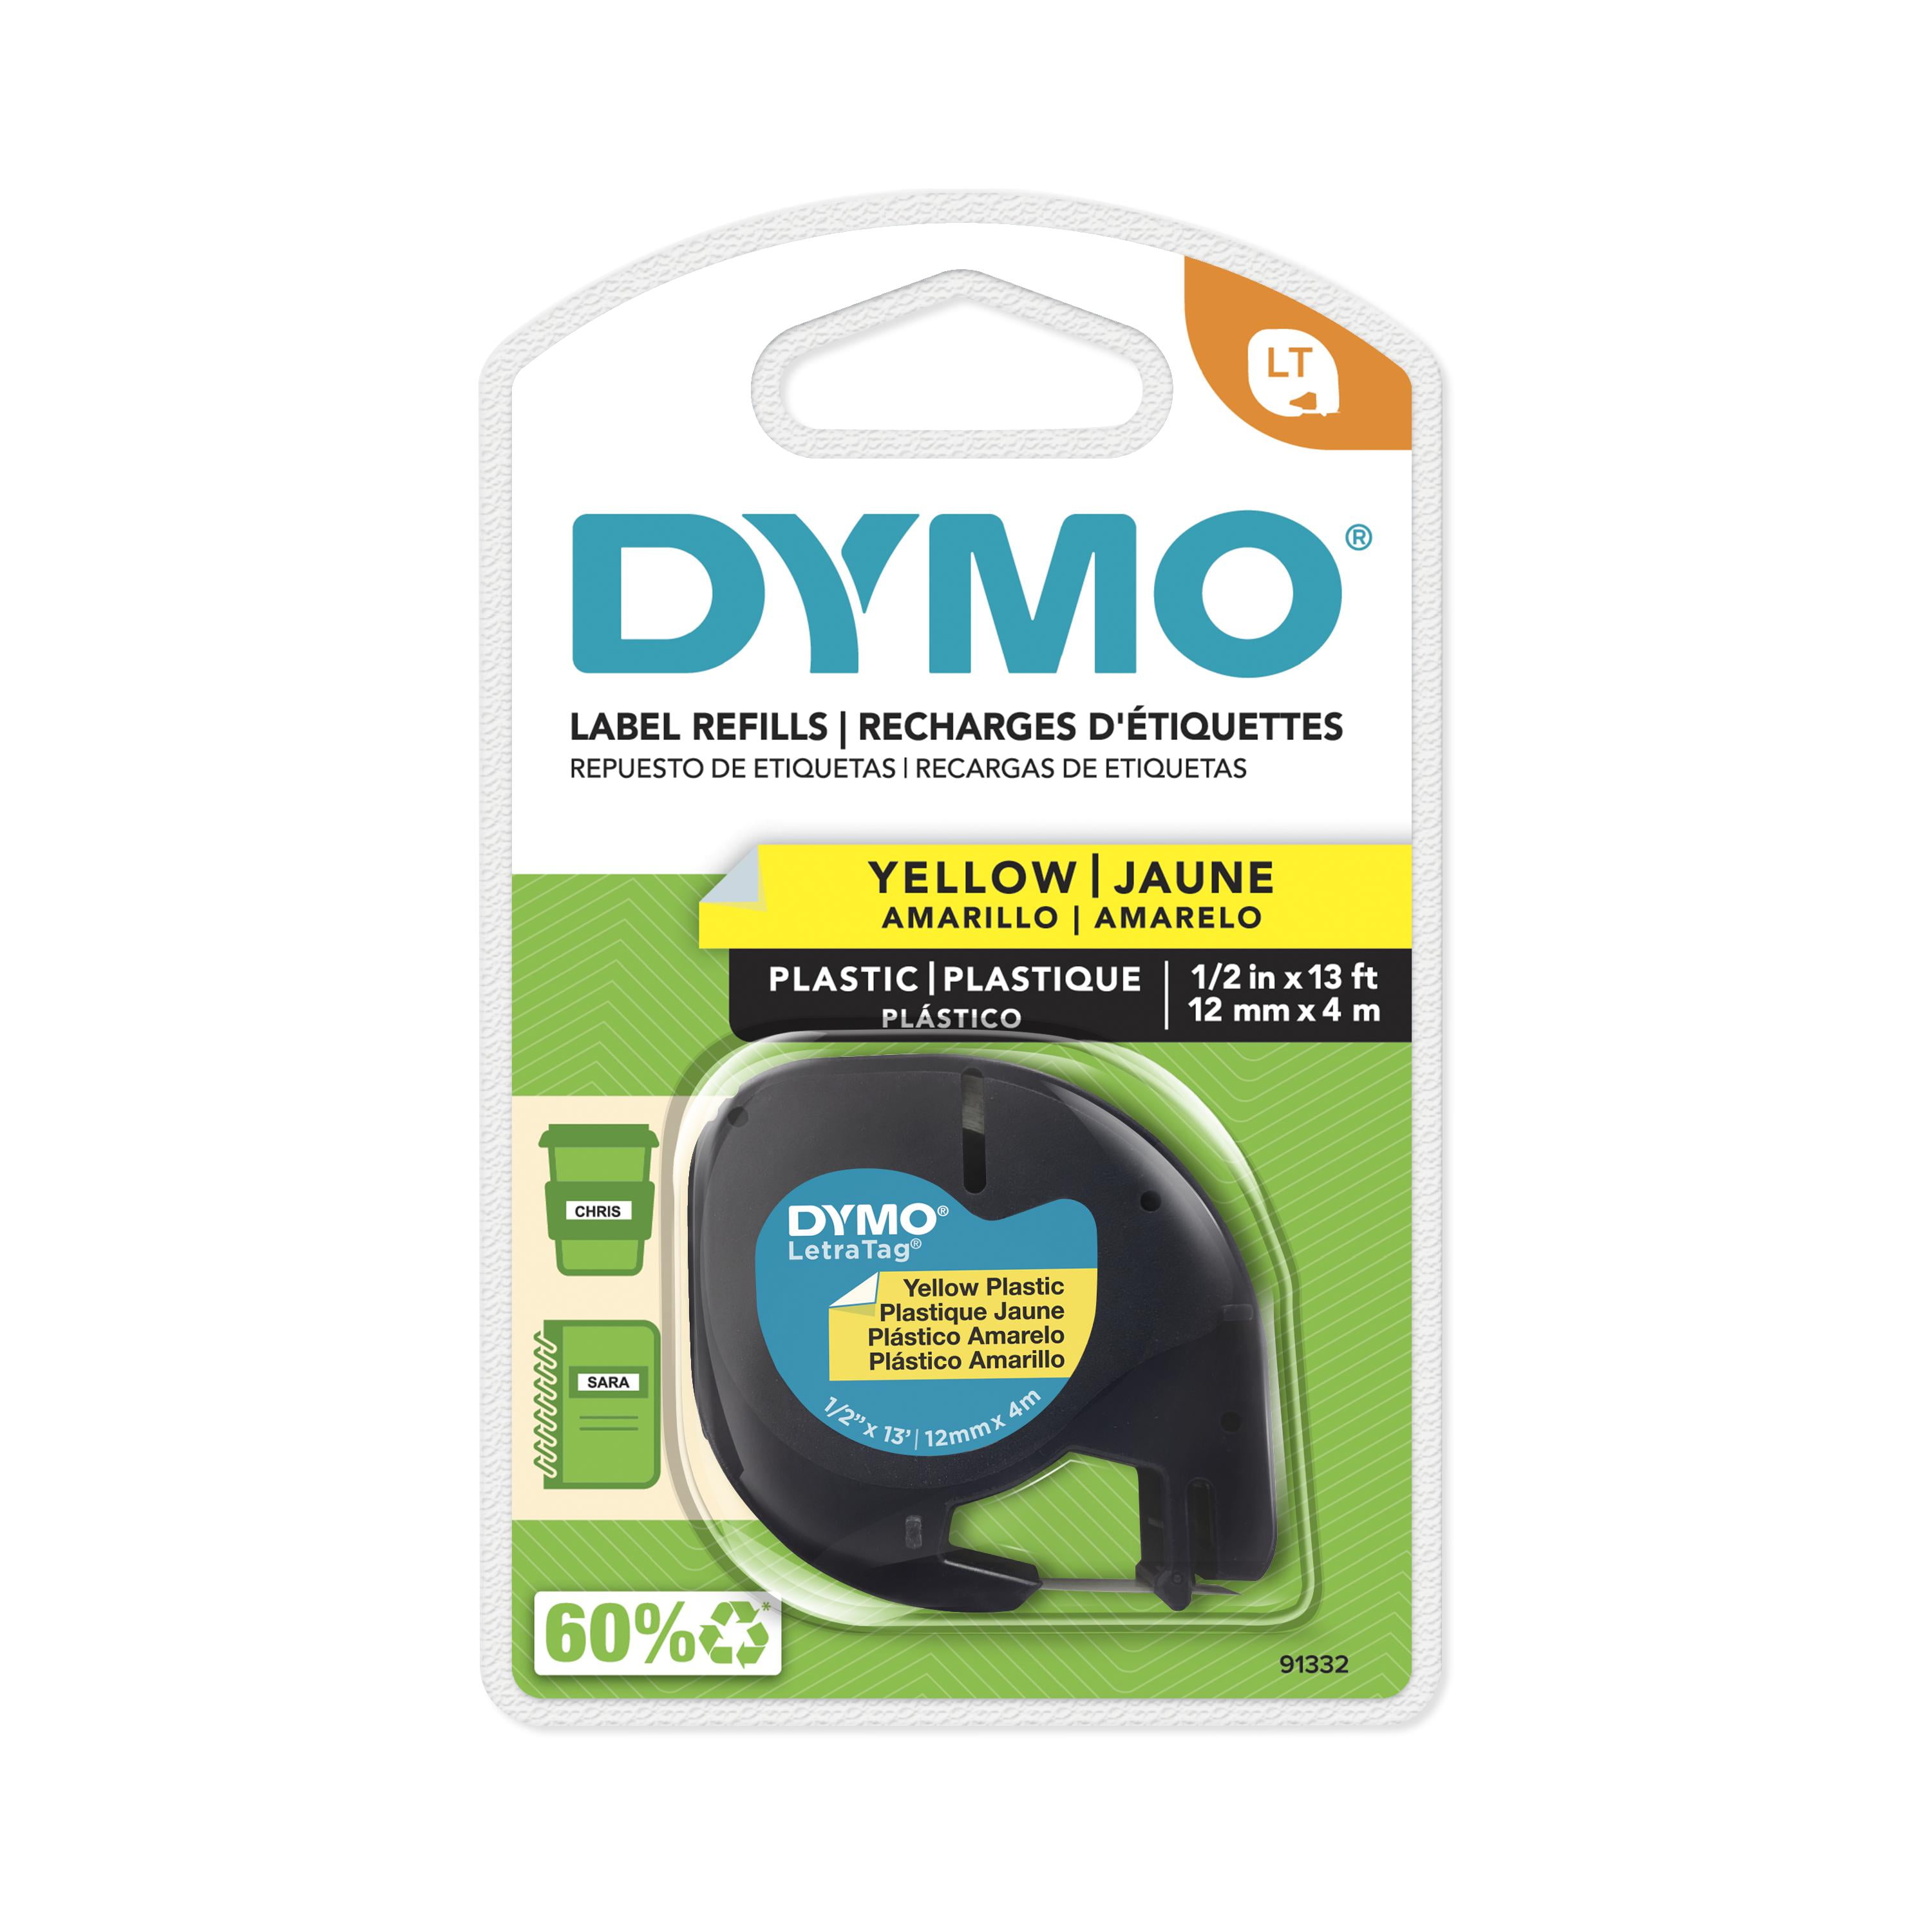 plastic tape cartridge 91202 yellow 12mm x 4m for DYMO LETRATAG labellers 